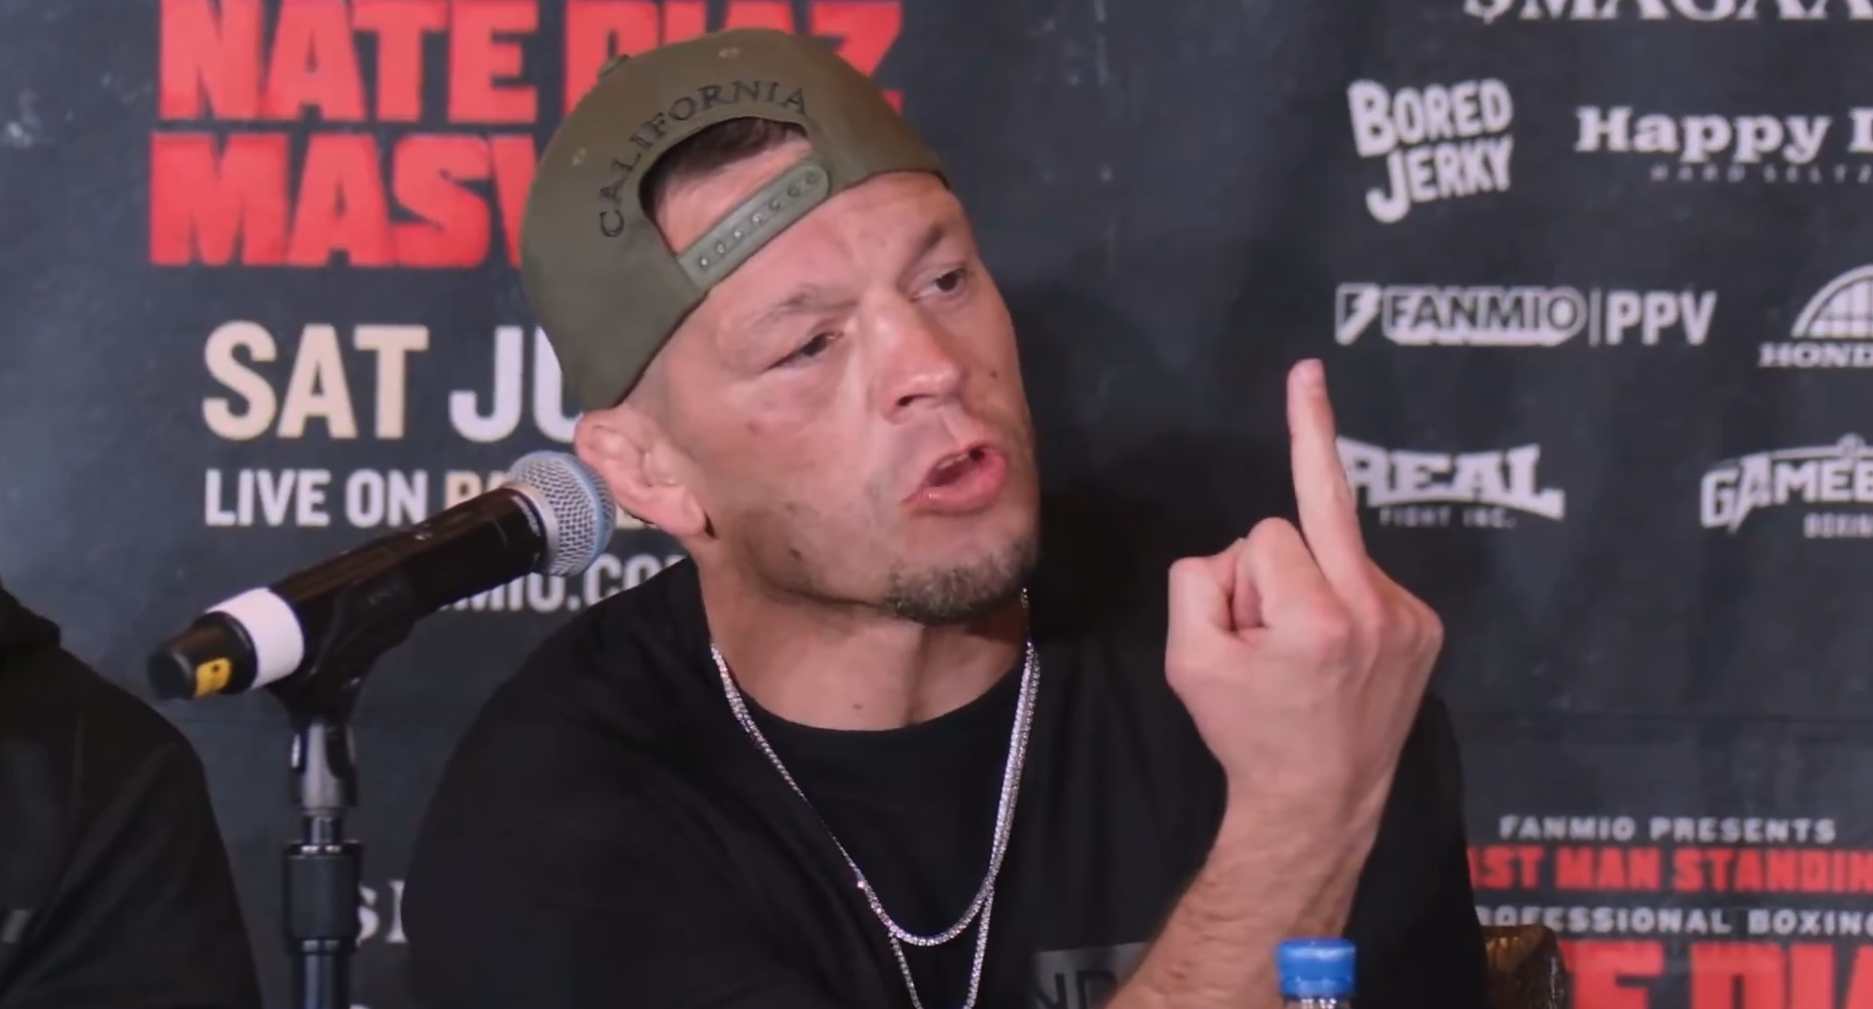 Video: Nate Diaz loses cool, threatens influencer N3on after getting trolled at press conference